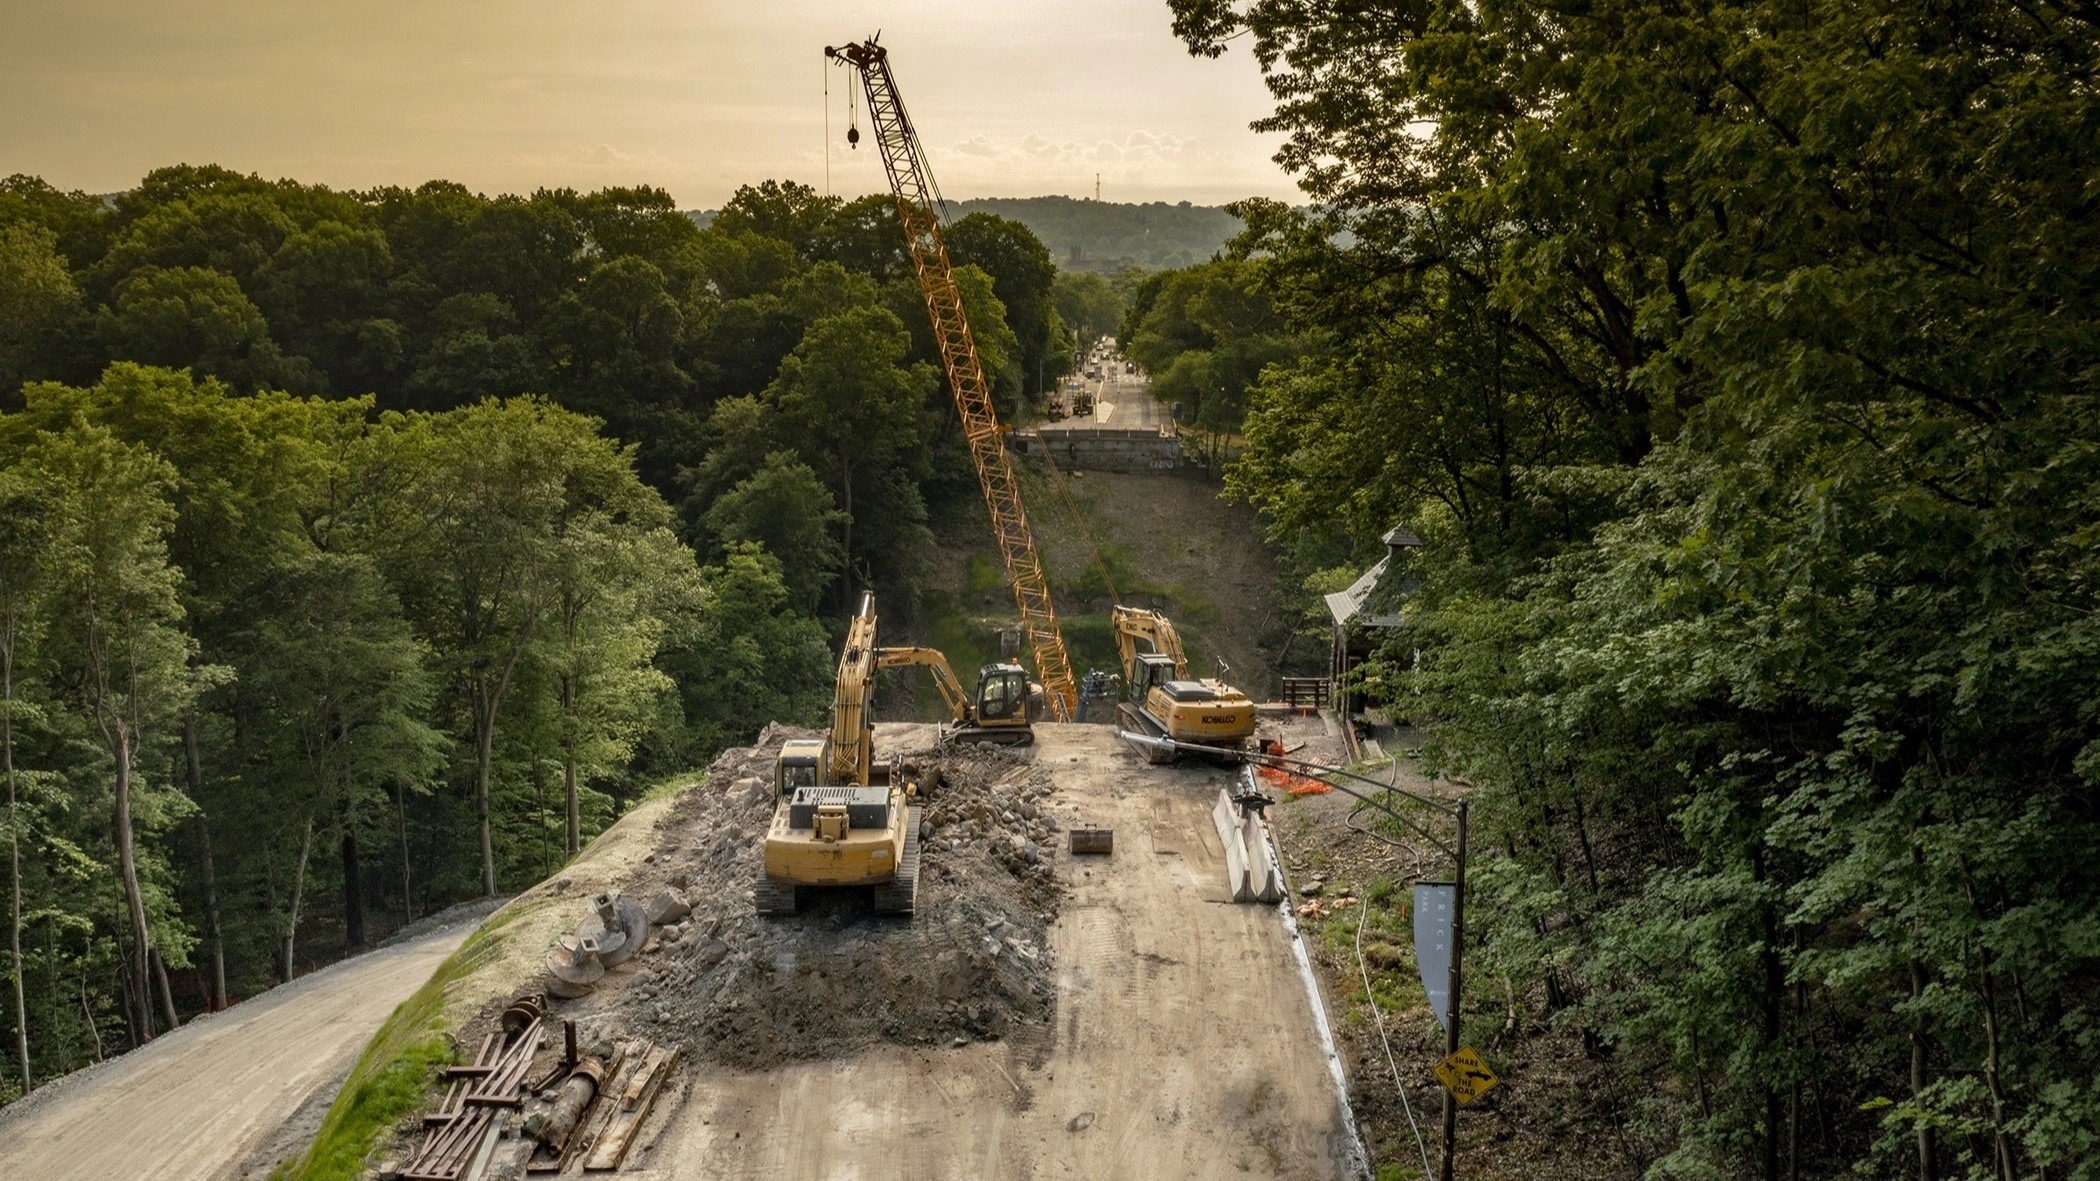 An image of large yellow pieces of construction equipment in the foreground next to an open space where the Fern Hollow Bridge used to prior to the collapse; the site is being prepared for the rebuilding of the bridge 